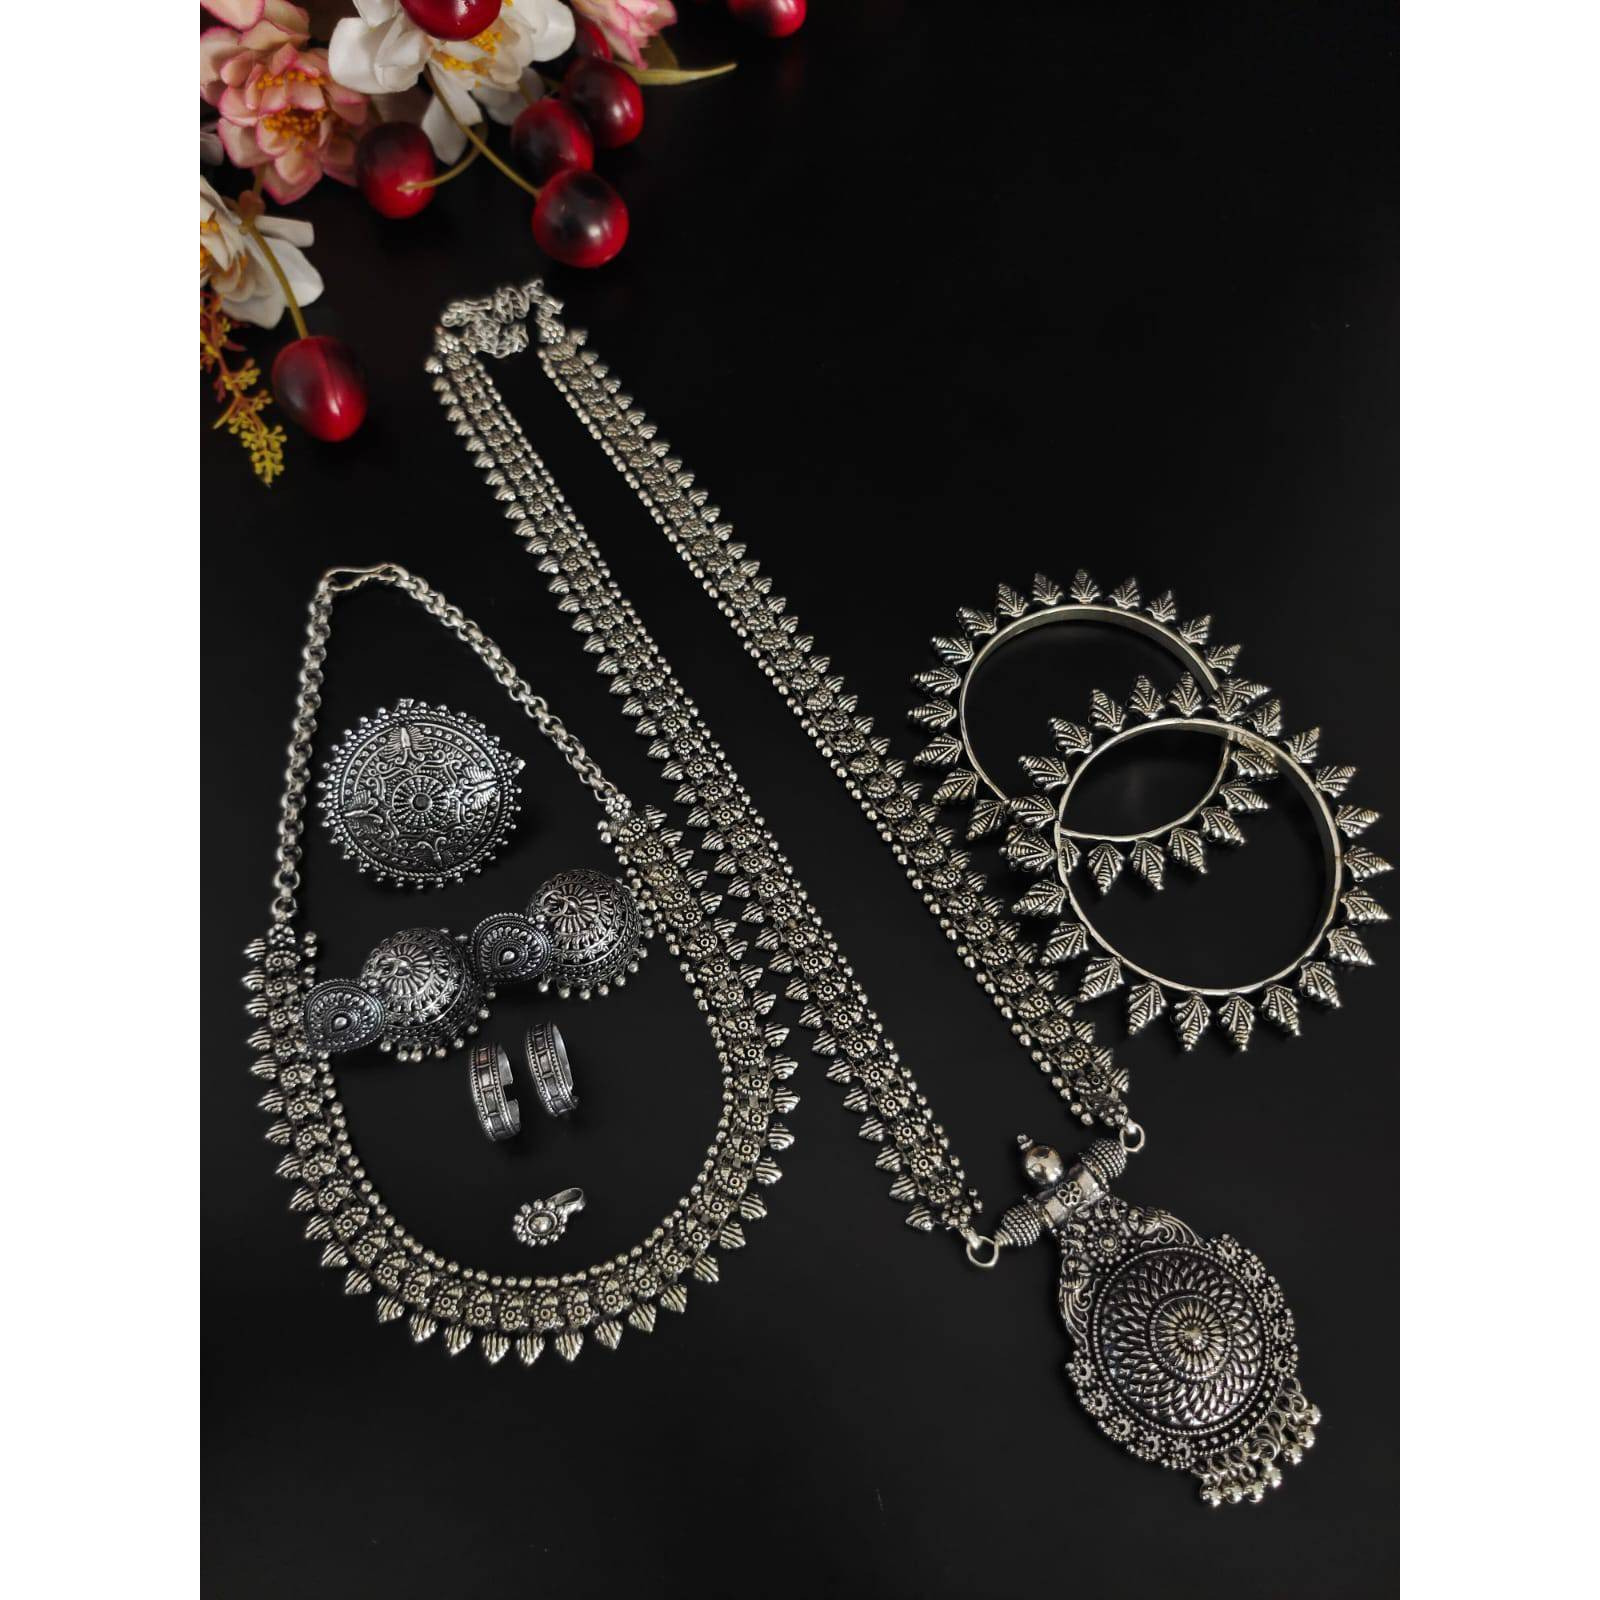 Ethnic Oxidised Silver Choker Set, Antique Oxidized Indian Choker set, Indian Jhumka, Big Jhumki with Choker, Elegant & Trendy NecklaceThis is a perfect example of subtle beauty with a loud personality. With a pinch of modernity with a choker pattern, this ethnic oxidized beauty is a must-have! So, if you are looking to step up your ethnic look by a notch, this set is perfect. This choker set will give you a contrasting yet interesting personality and confidence! So, roll the heads over you with